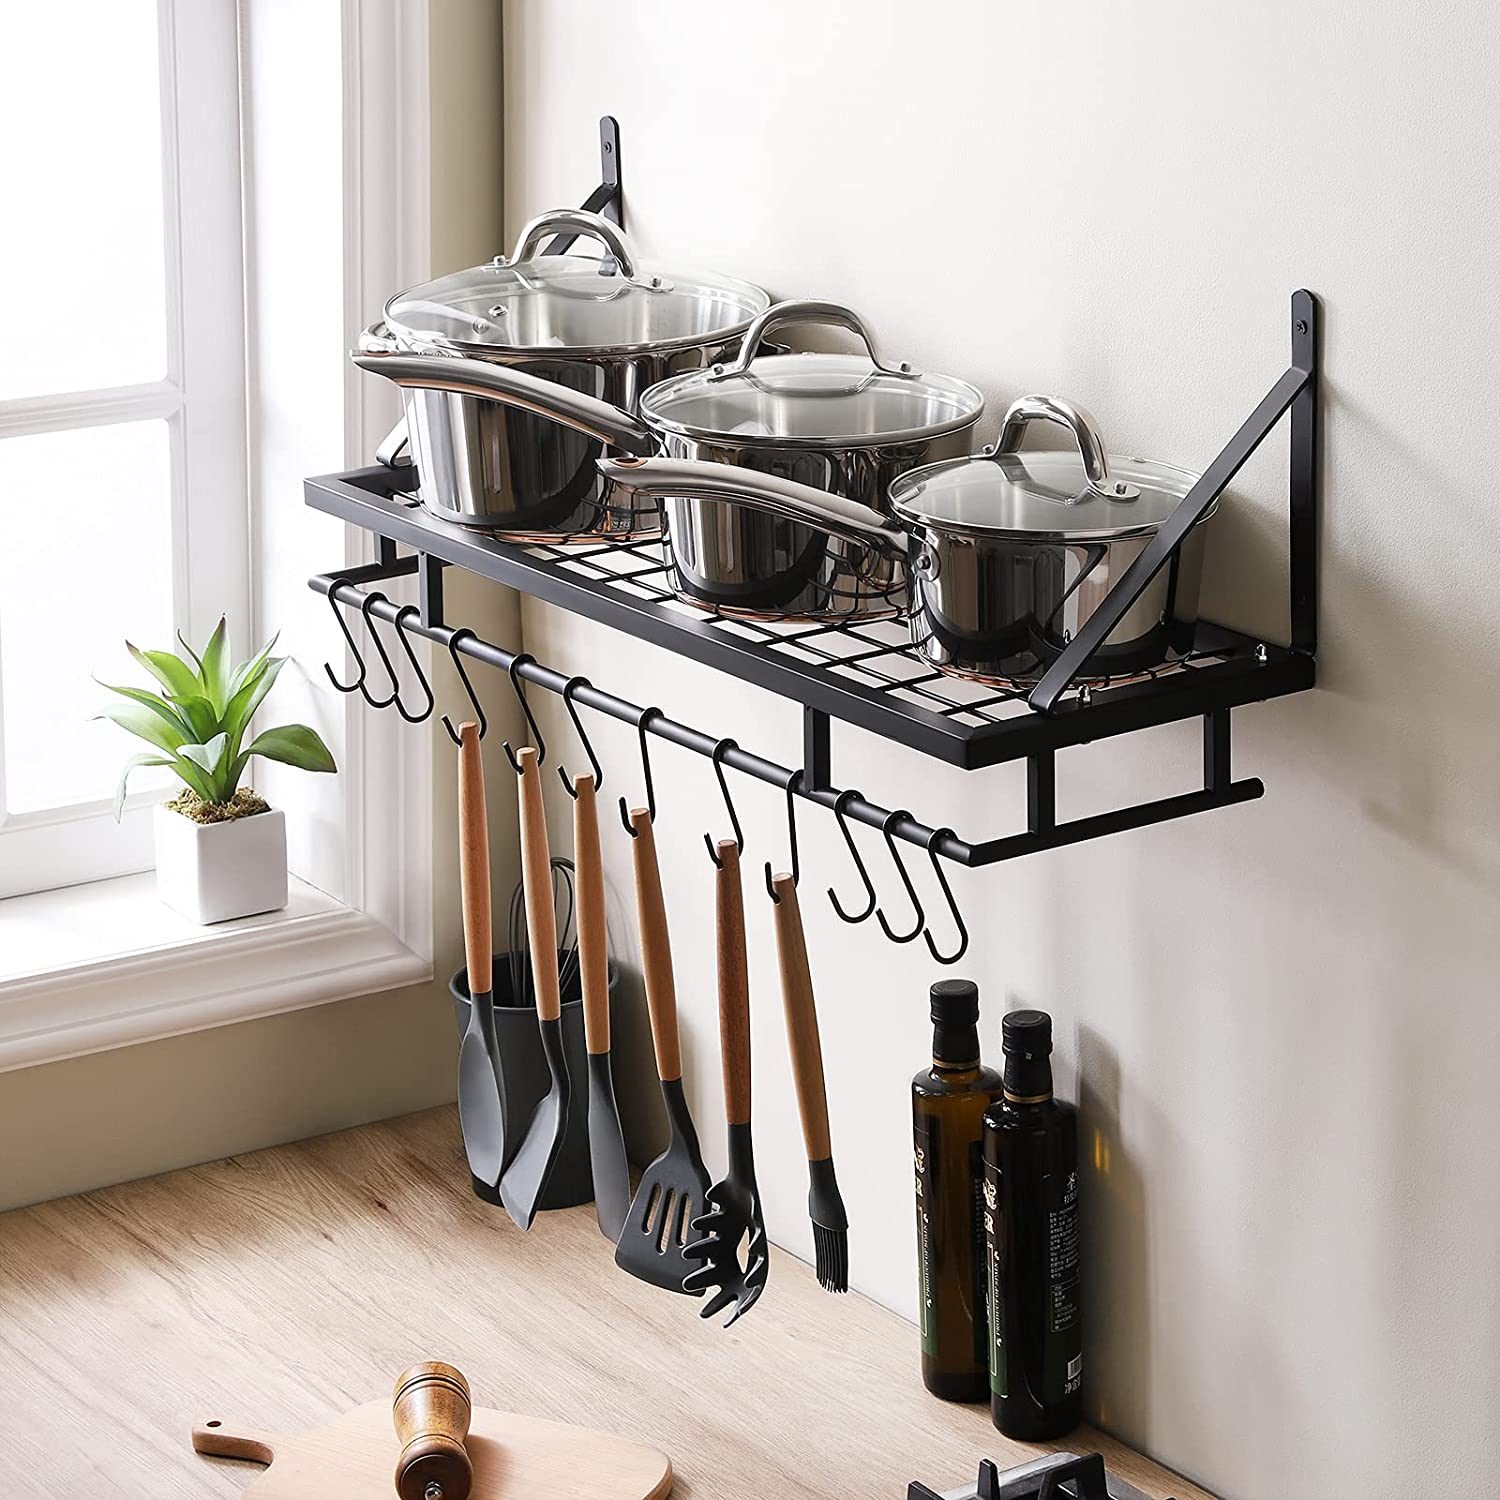 How To Store Pots And Pans In Small Kitchen